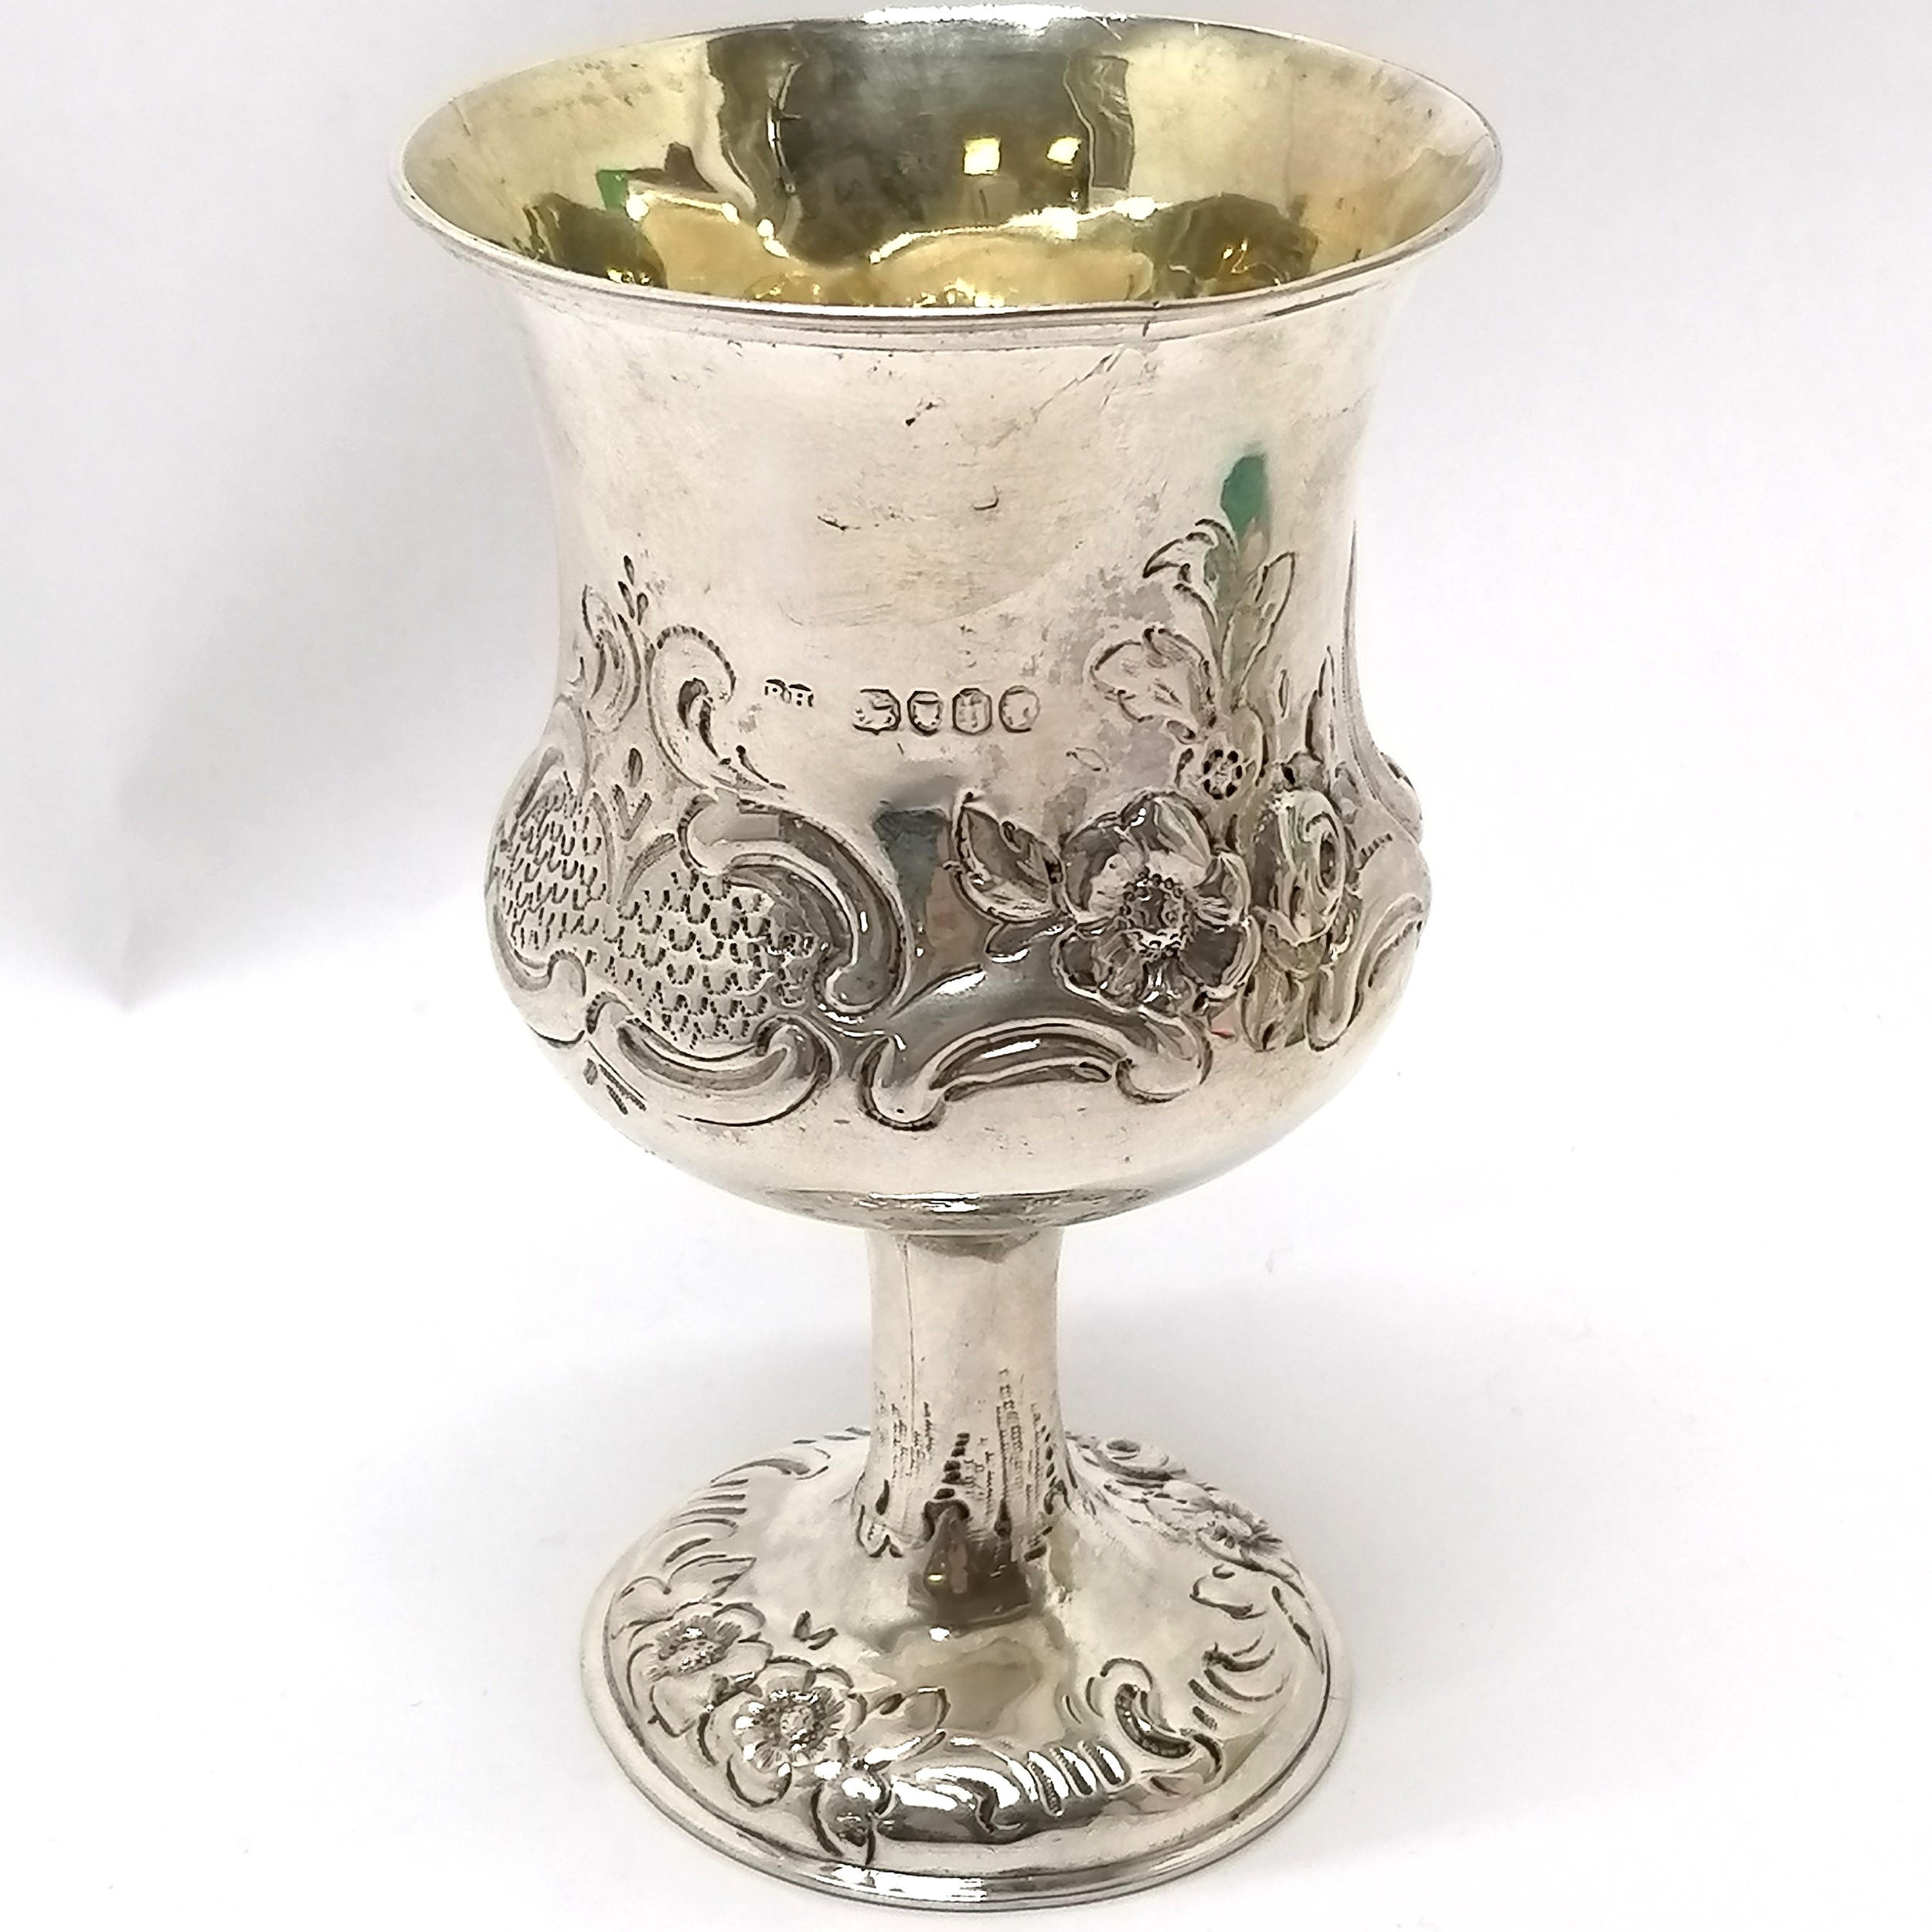 1863 silver goblet (with gilt interior) by Robert Harper (?) - 13cm & 97g total weight ~ has - Image 5 of 5